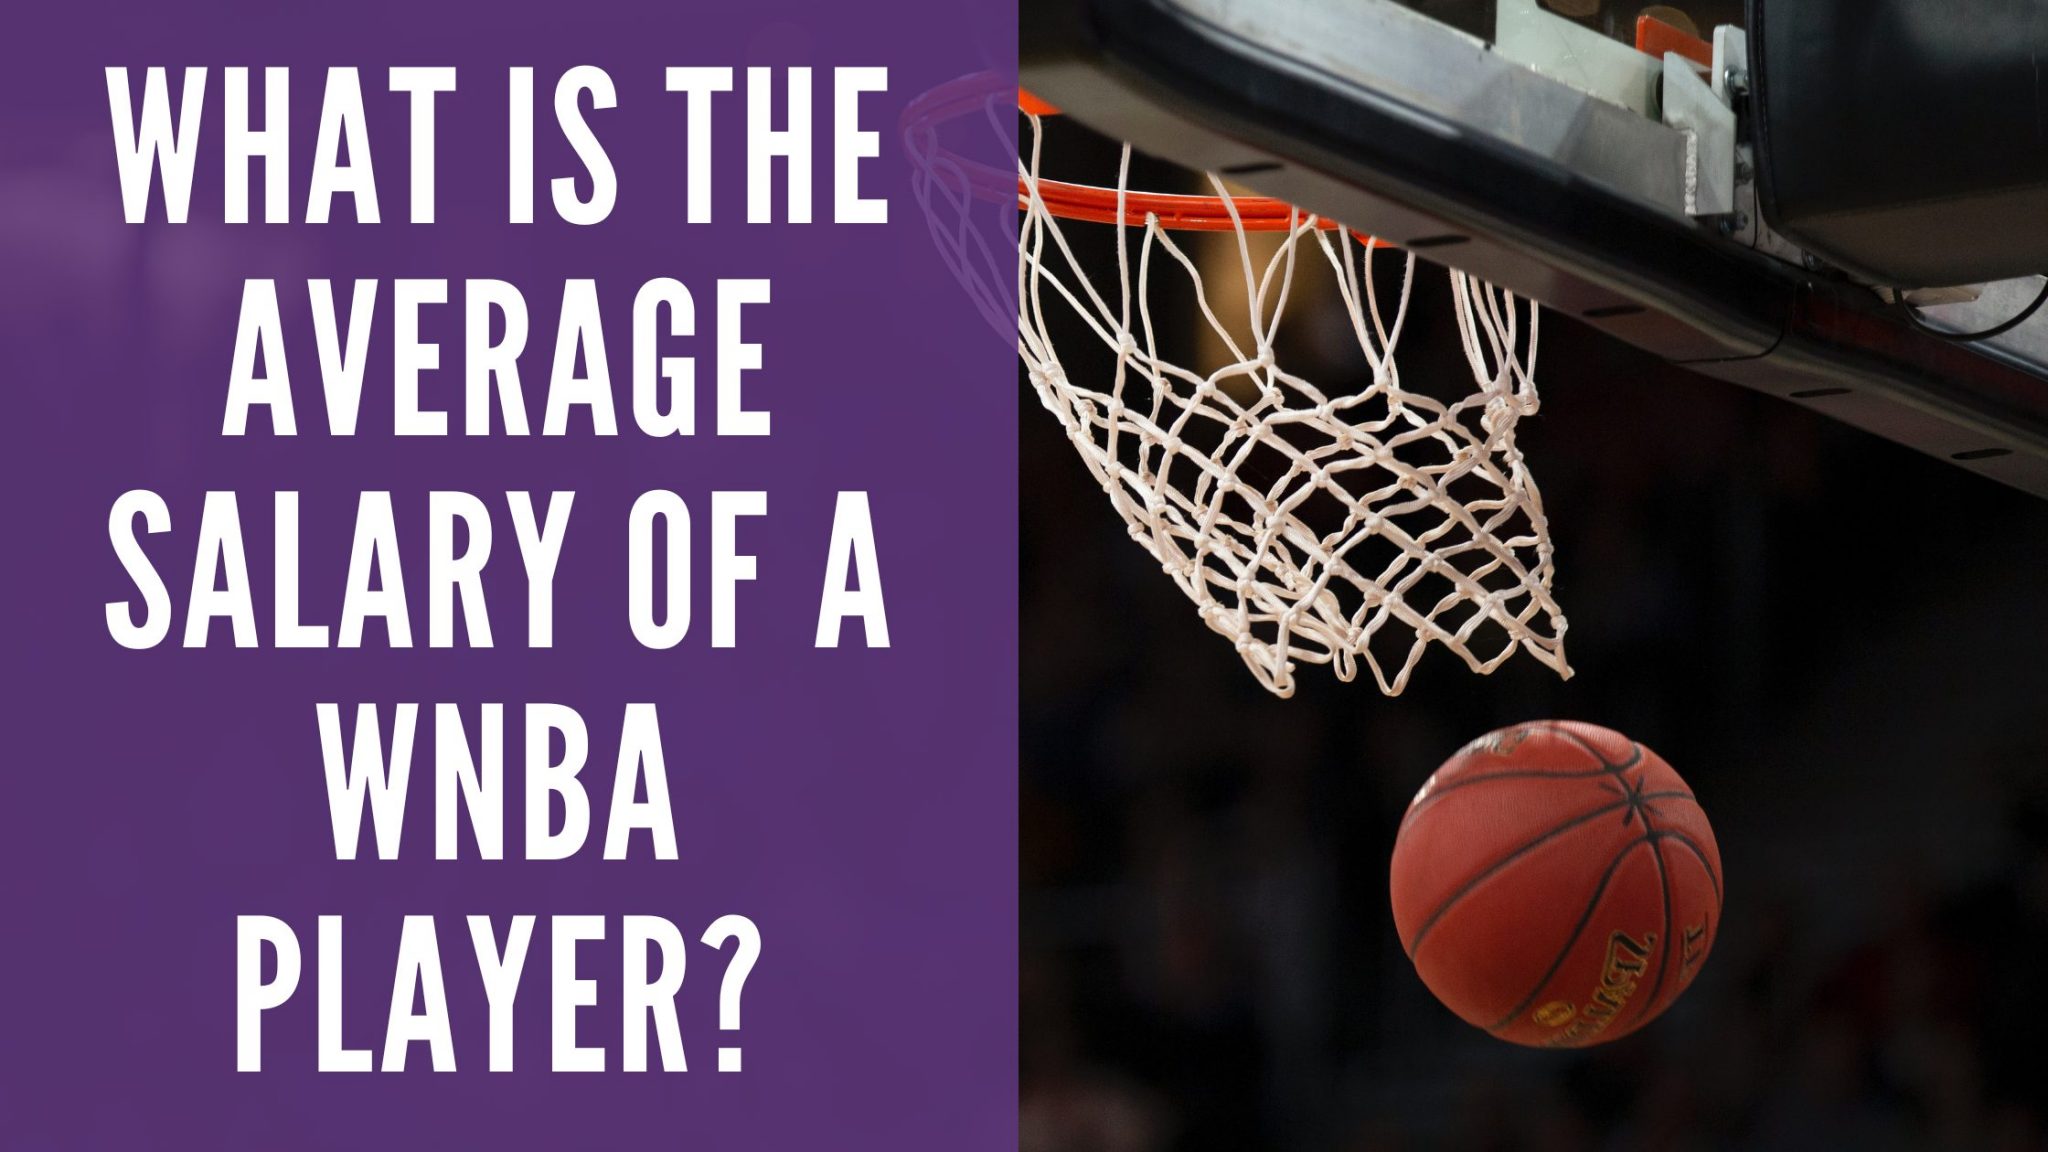 What is the average salary of a WNBA player? CareerExplorer